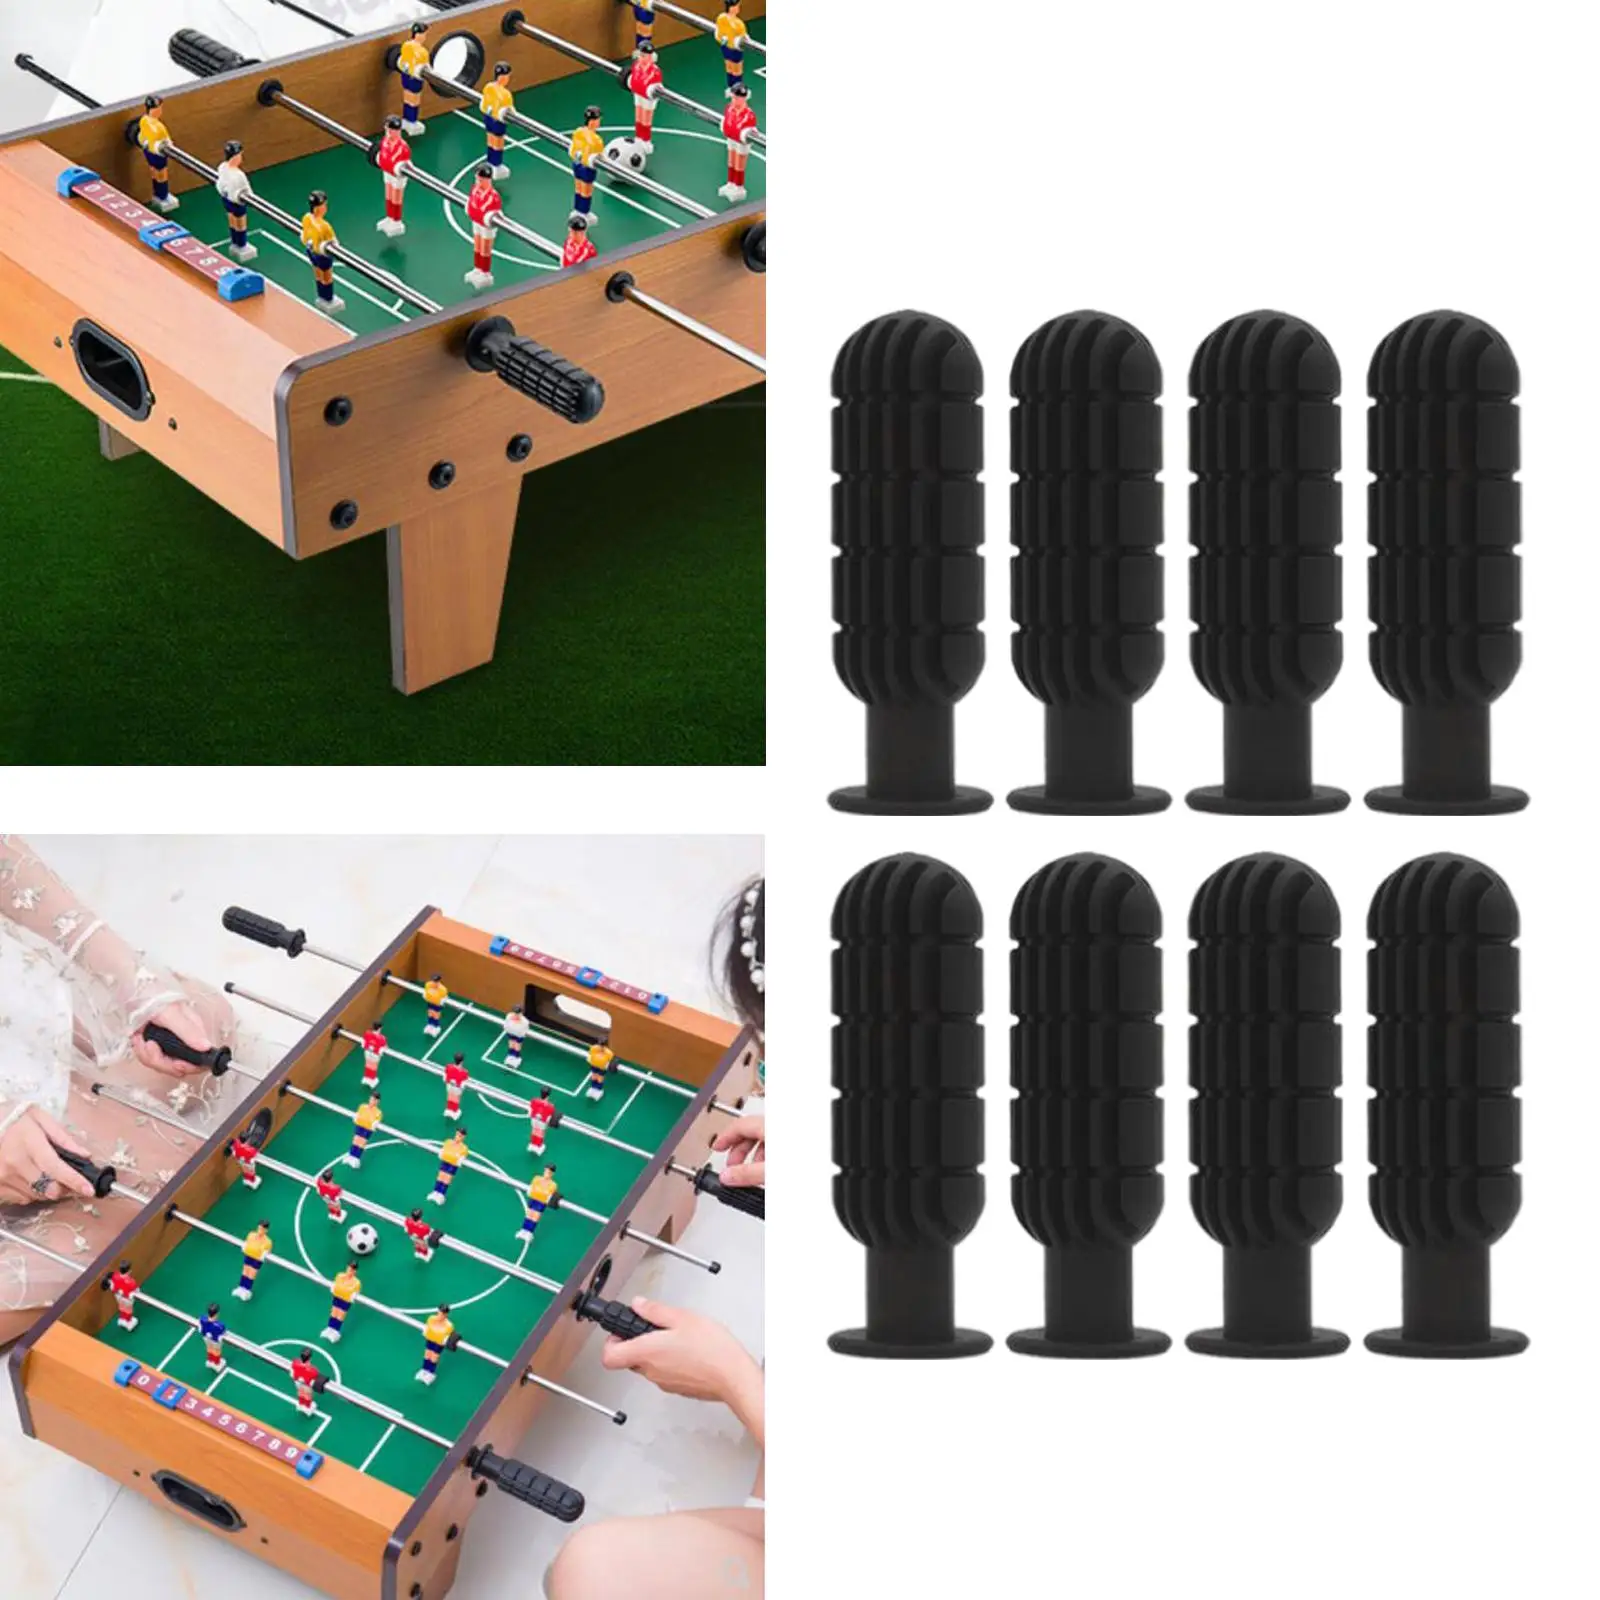 Table Soccer Foosball Details about   NONBRAND Wooden Foosball Handle Grips for Foosball Table 